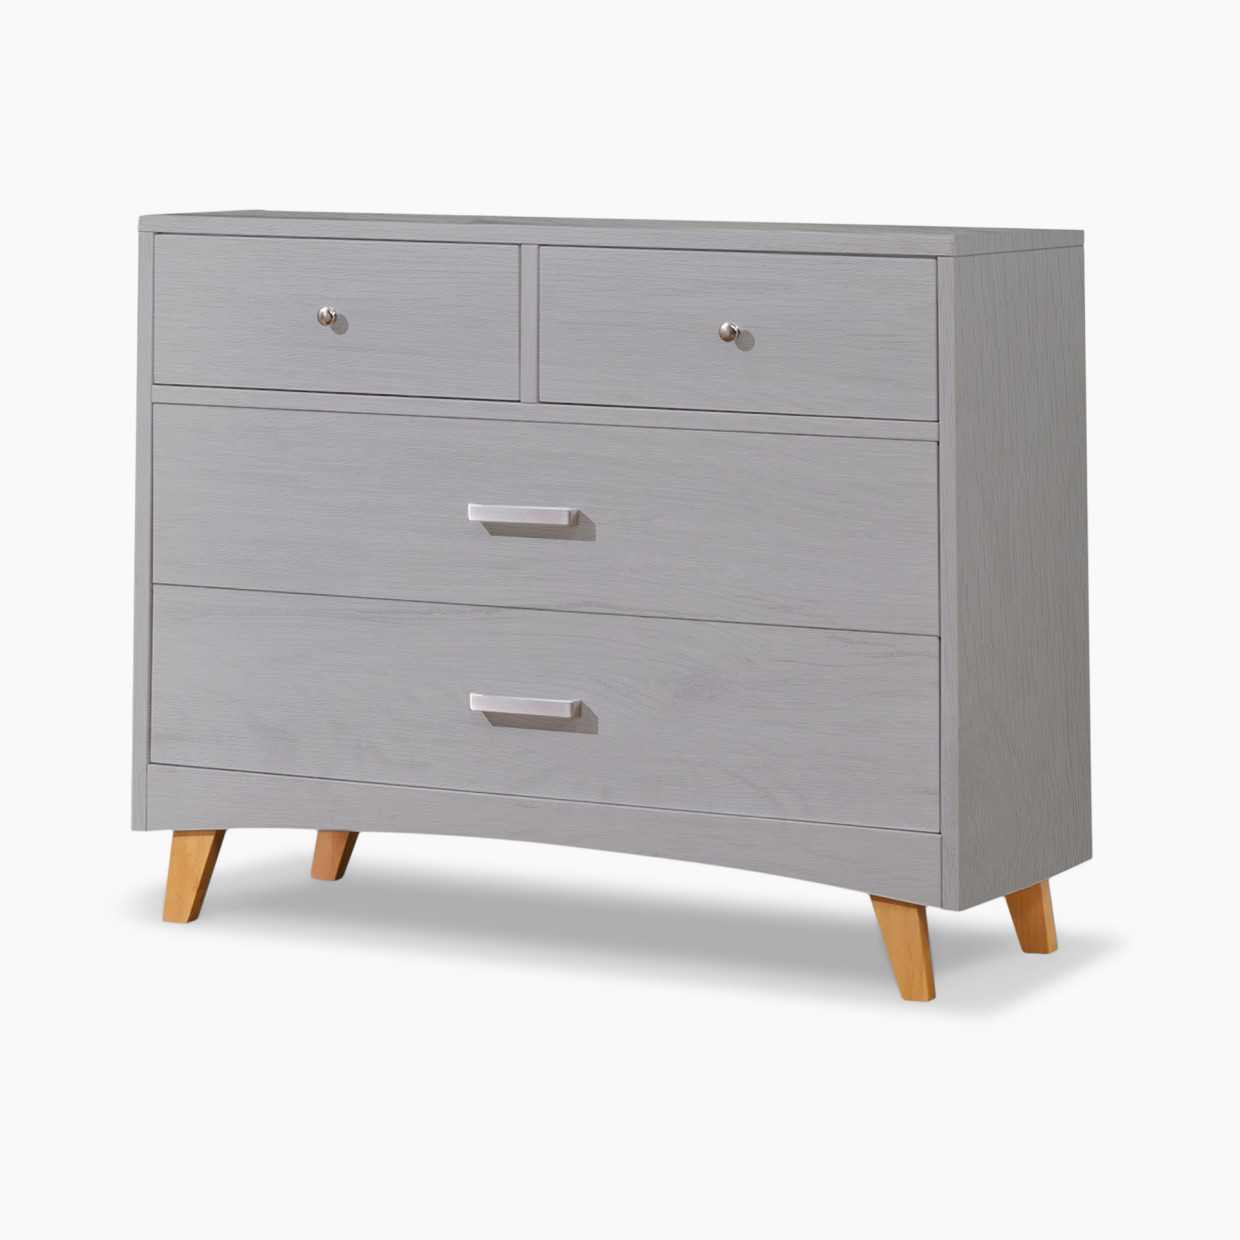 Sorelle Soho 4 Drawer Dresser - Weathered Gray And Natural Wood.